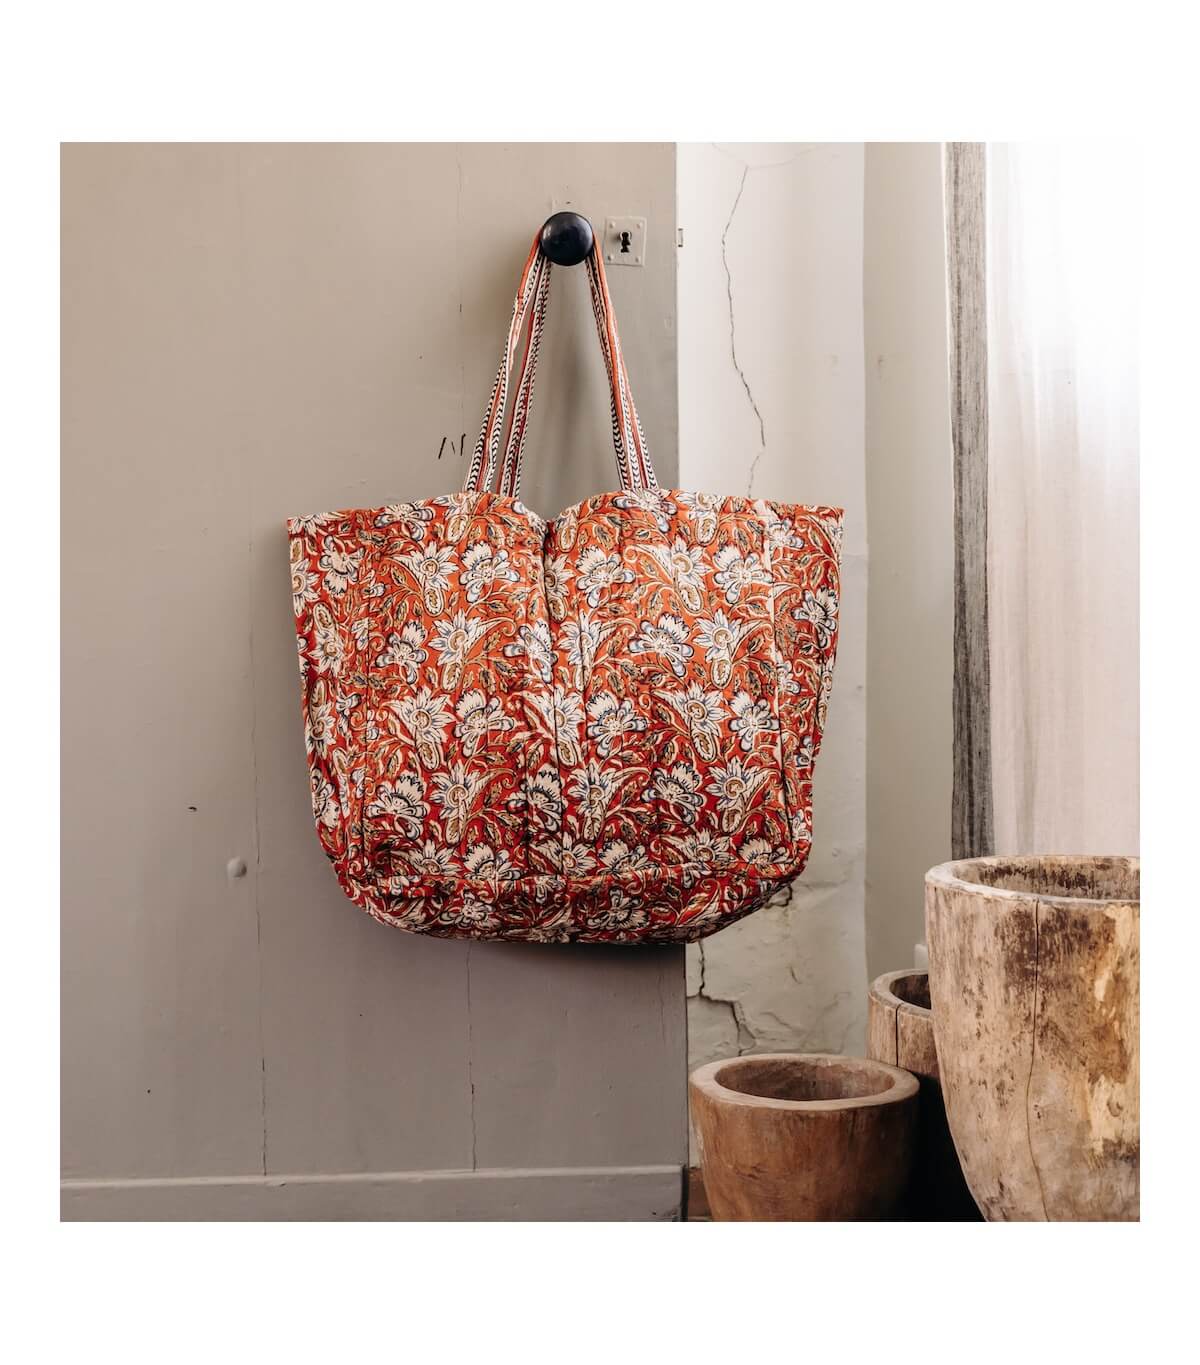 Bada - Floral indian bag - 17x15 inches